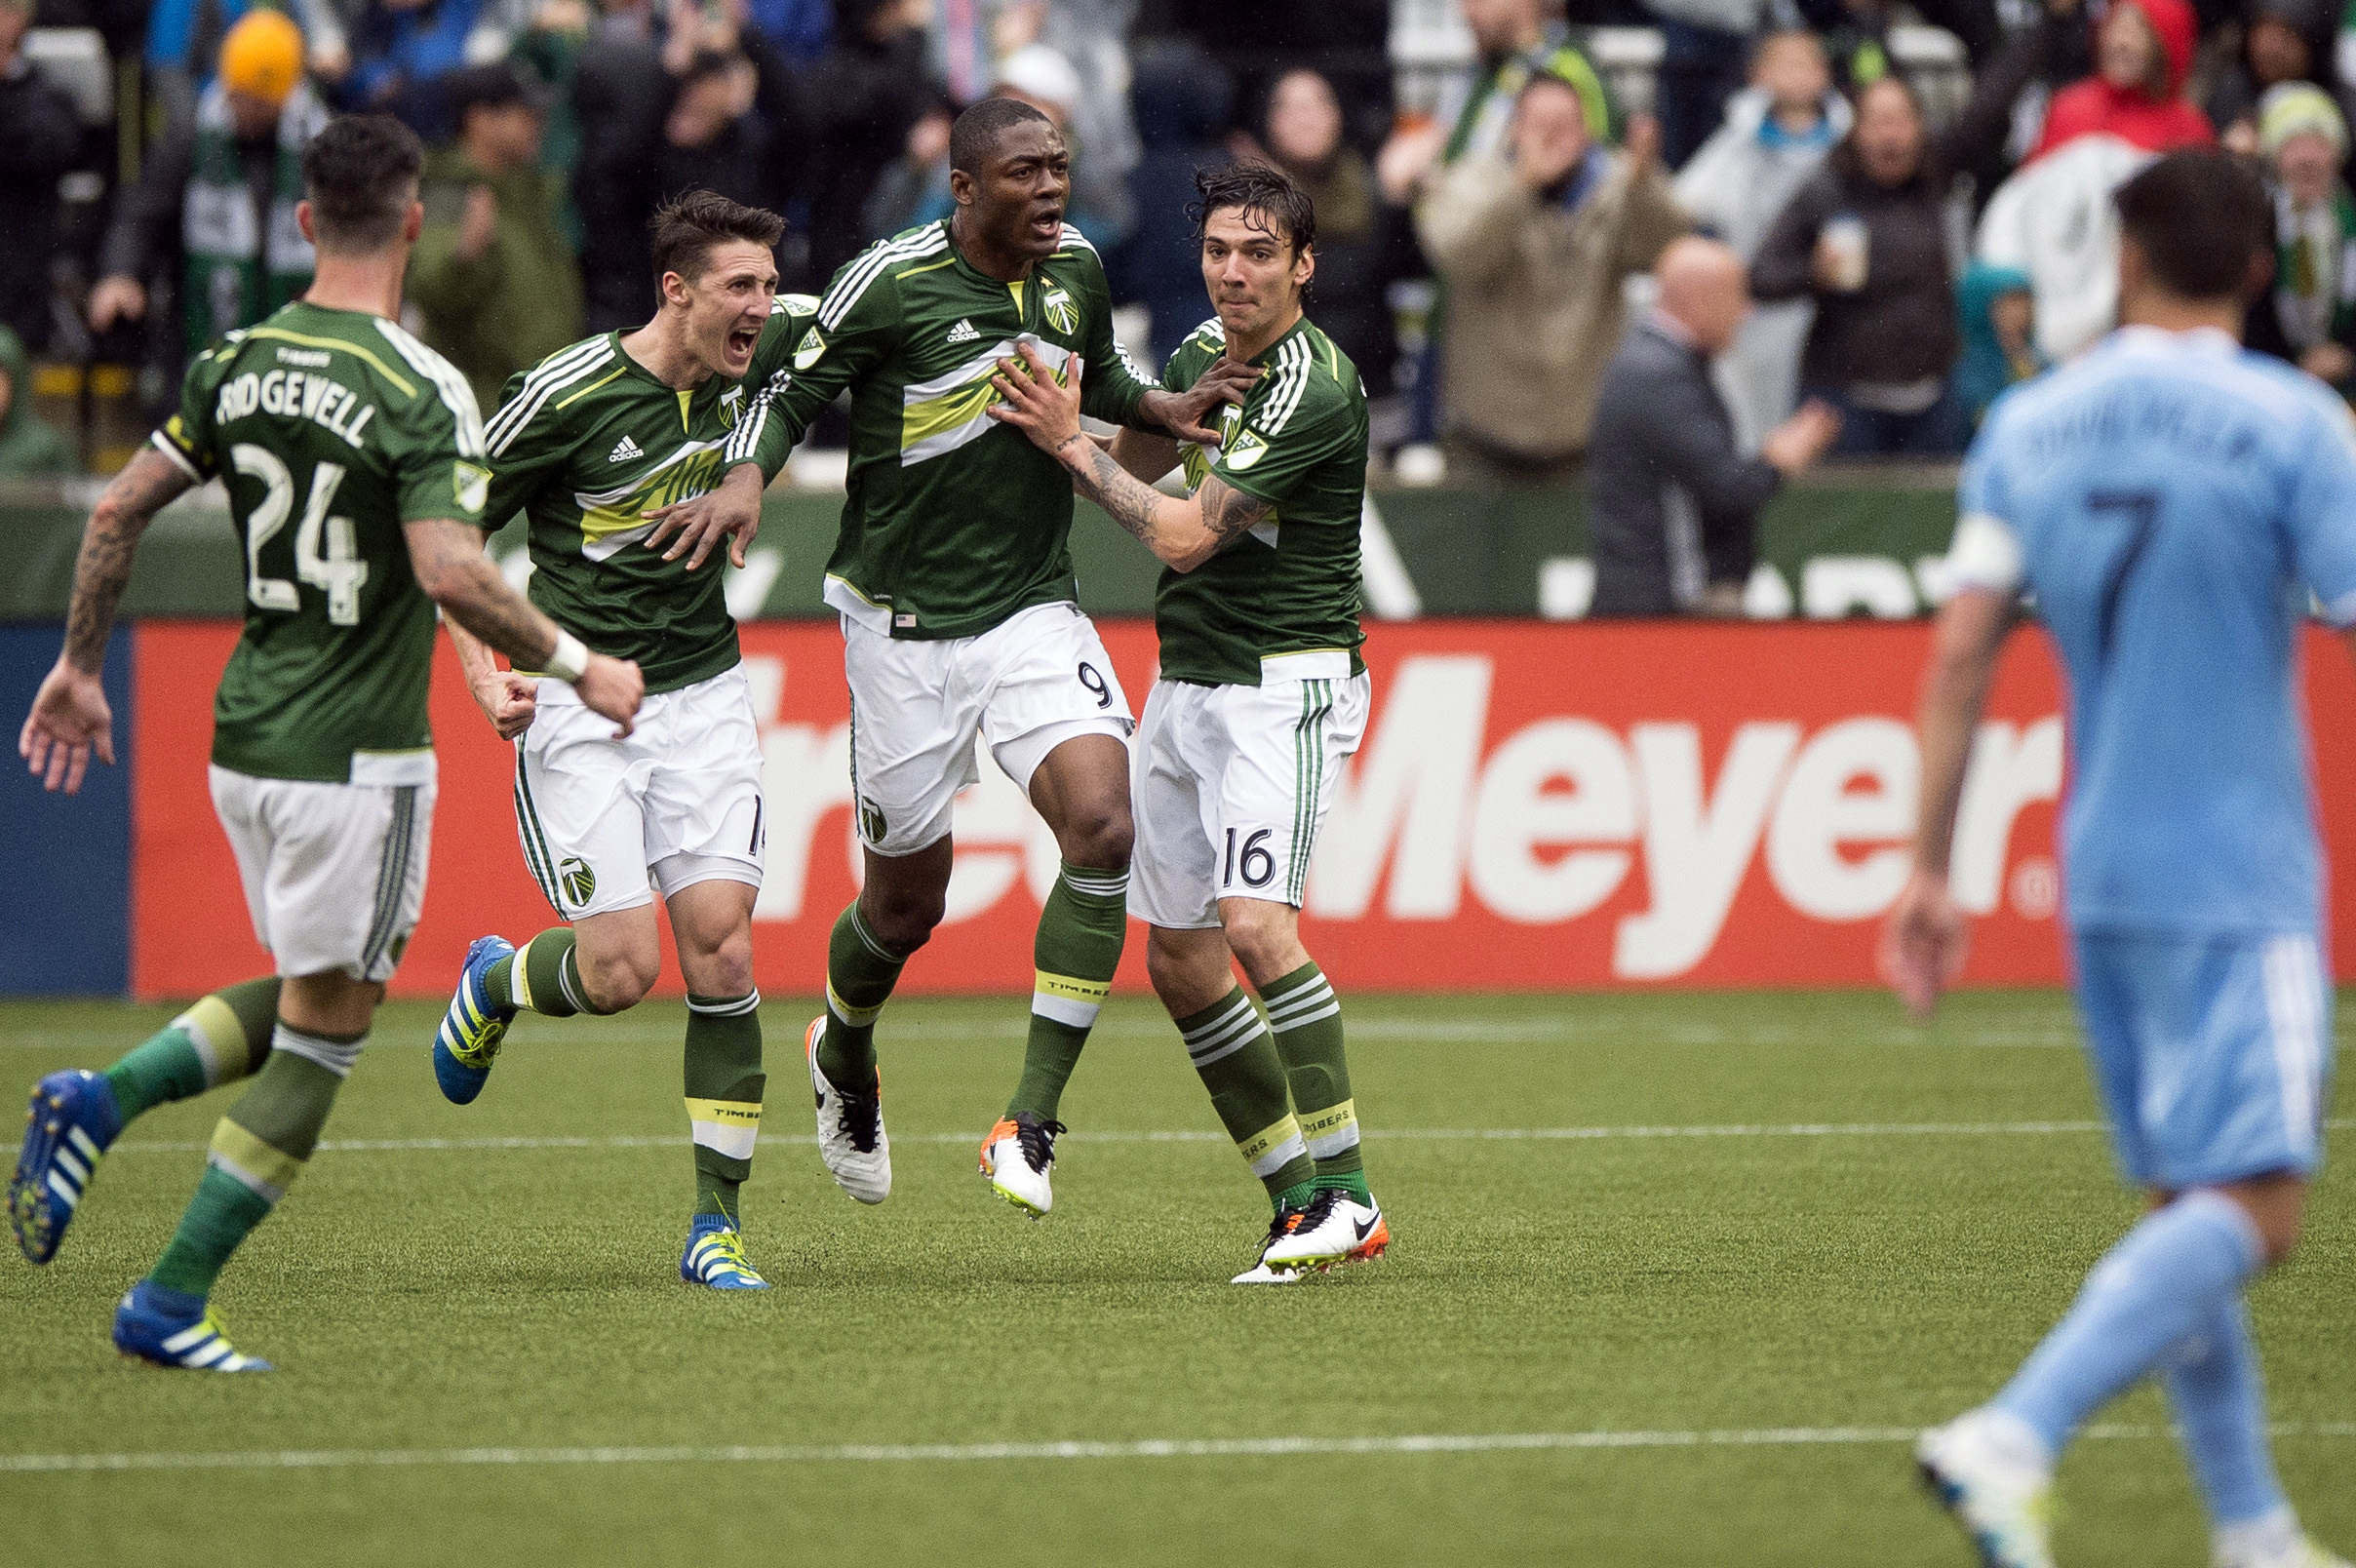 May 15, 2016; Portland, OR, USA; Portland Timbers forward Fanendo Adi (9) celebrates with teammates midfielder Ben Zemanski (14) and defender Zarek Valentin (16) during the second half in a game against New York City FC at Providence Park. New York FC won 2-1. Mandatory Credit: Troy Wayrynen-USA TODAY Sports